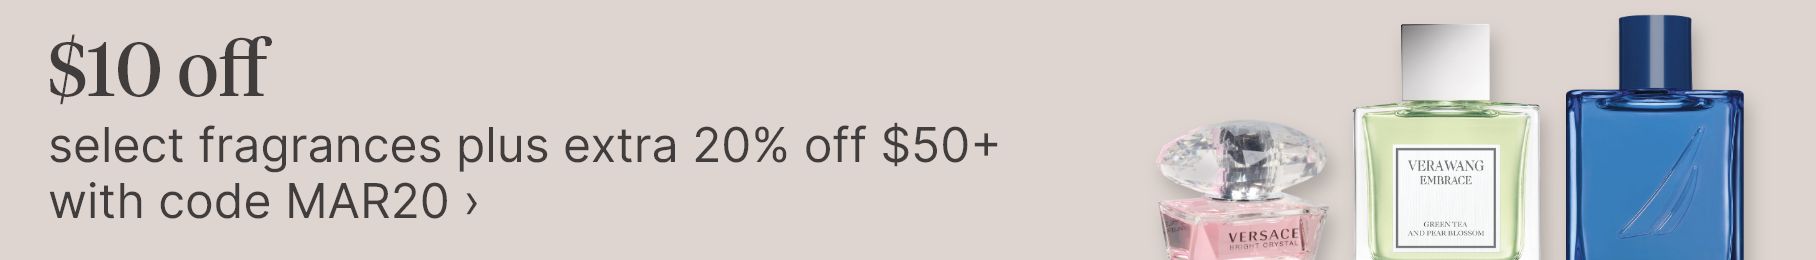 $10 off select fragrances plus extra 20% off $50+ with code MAR20.